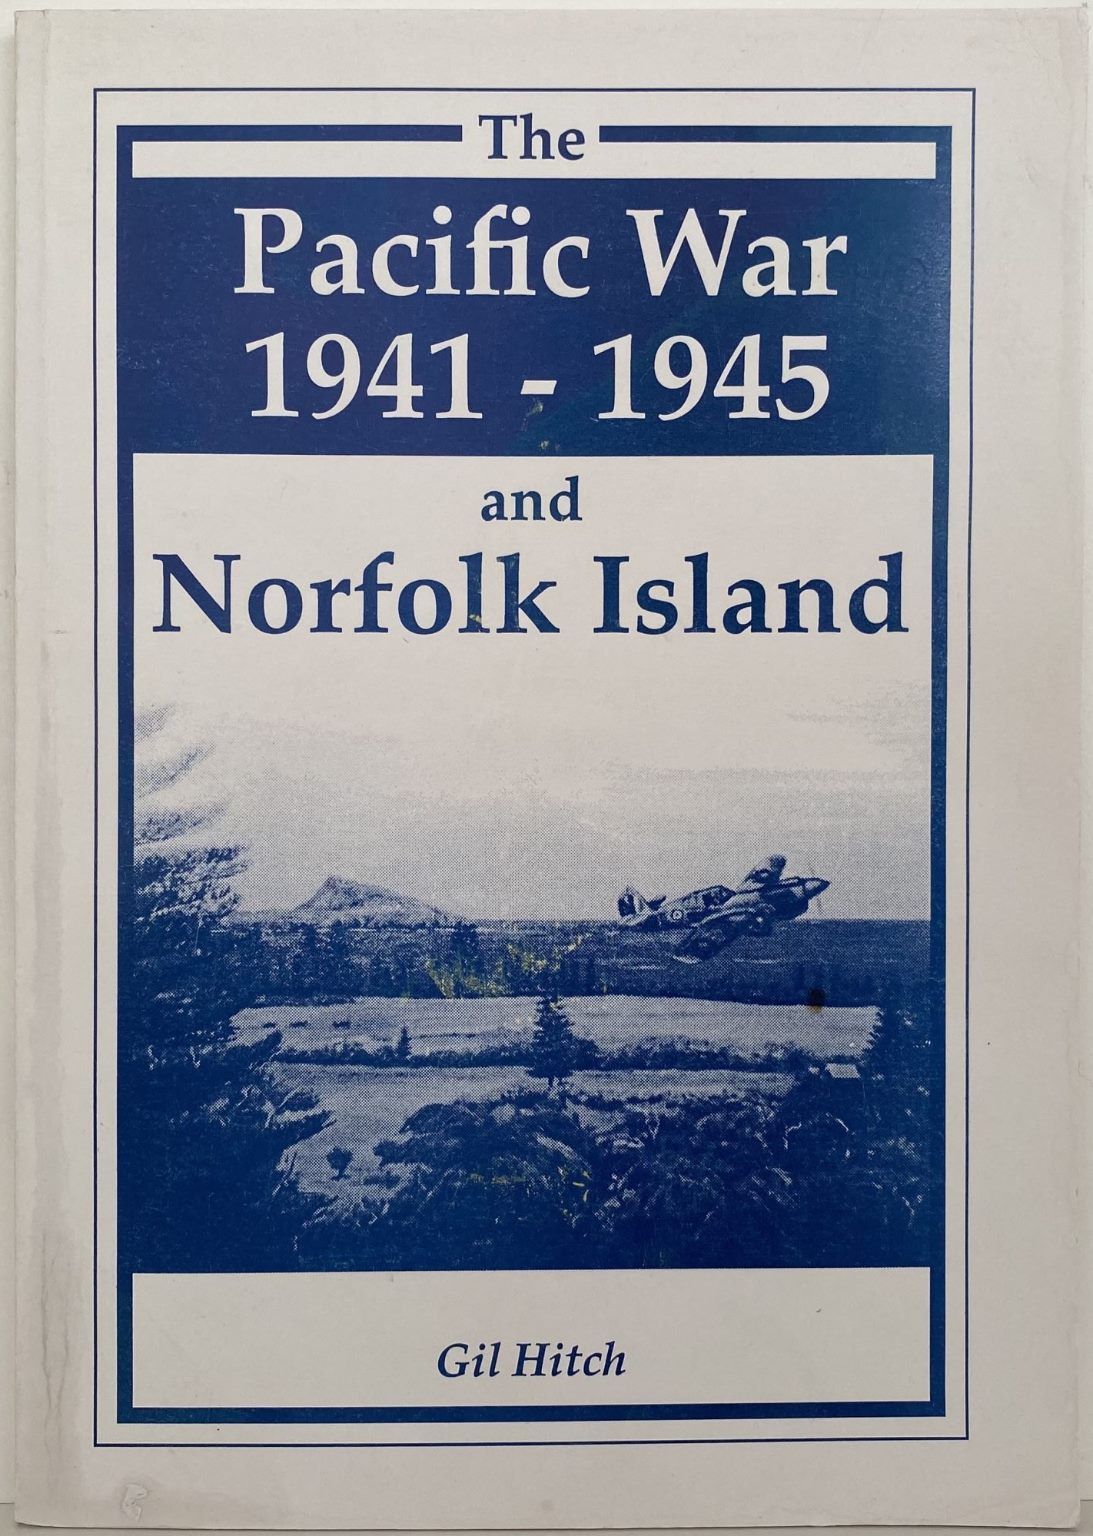 THE PACIFIC WAR 1941 - 1945 and Norfolk Island